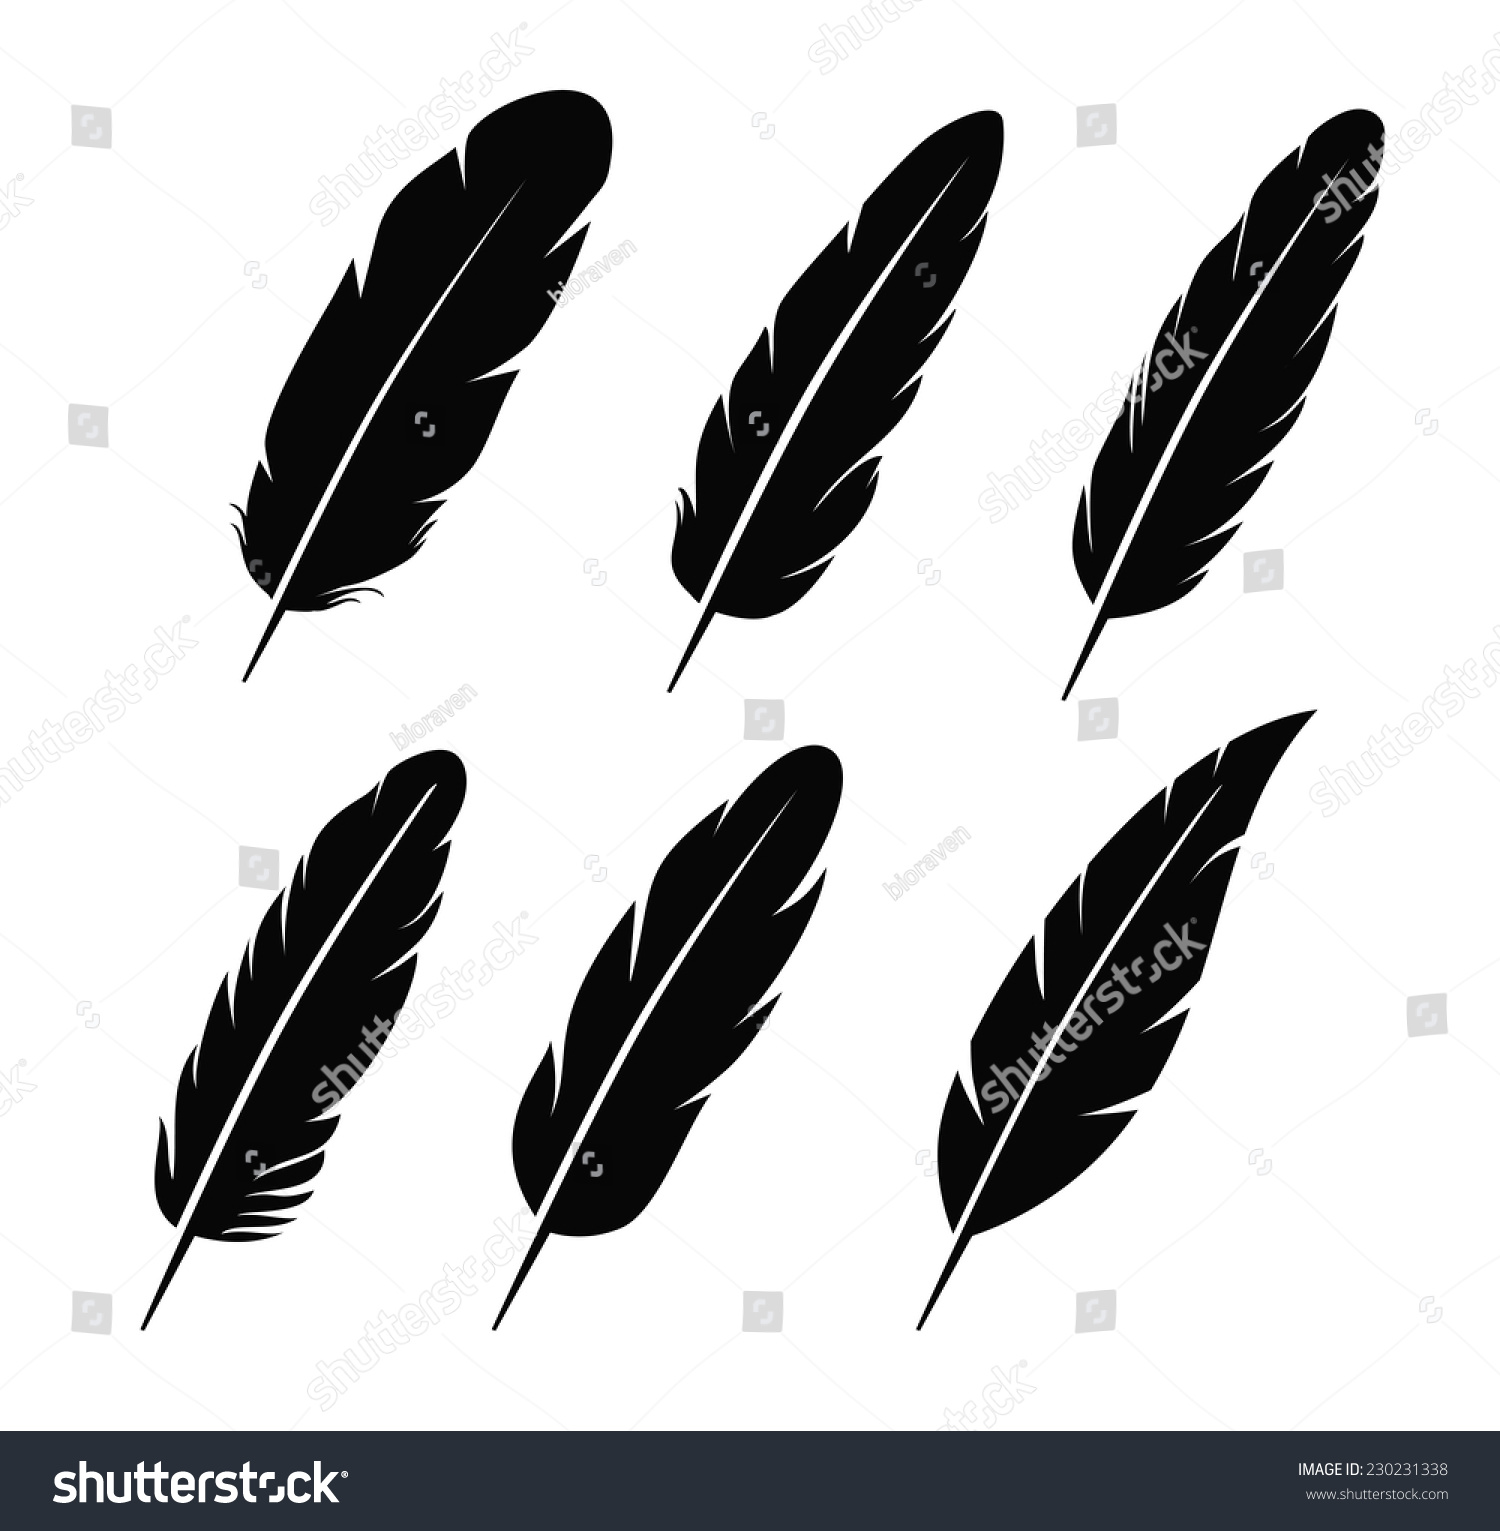 Vector Black Feather Icon On White Stock Vector 230231338 - Shutterstock